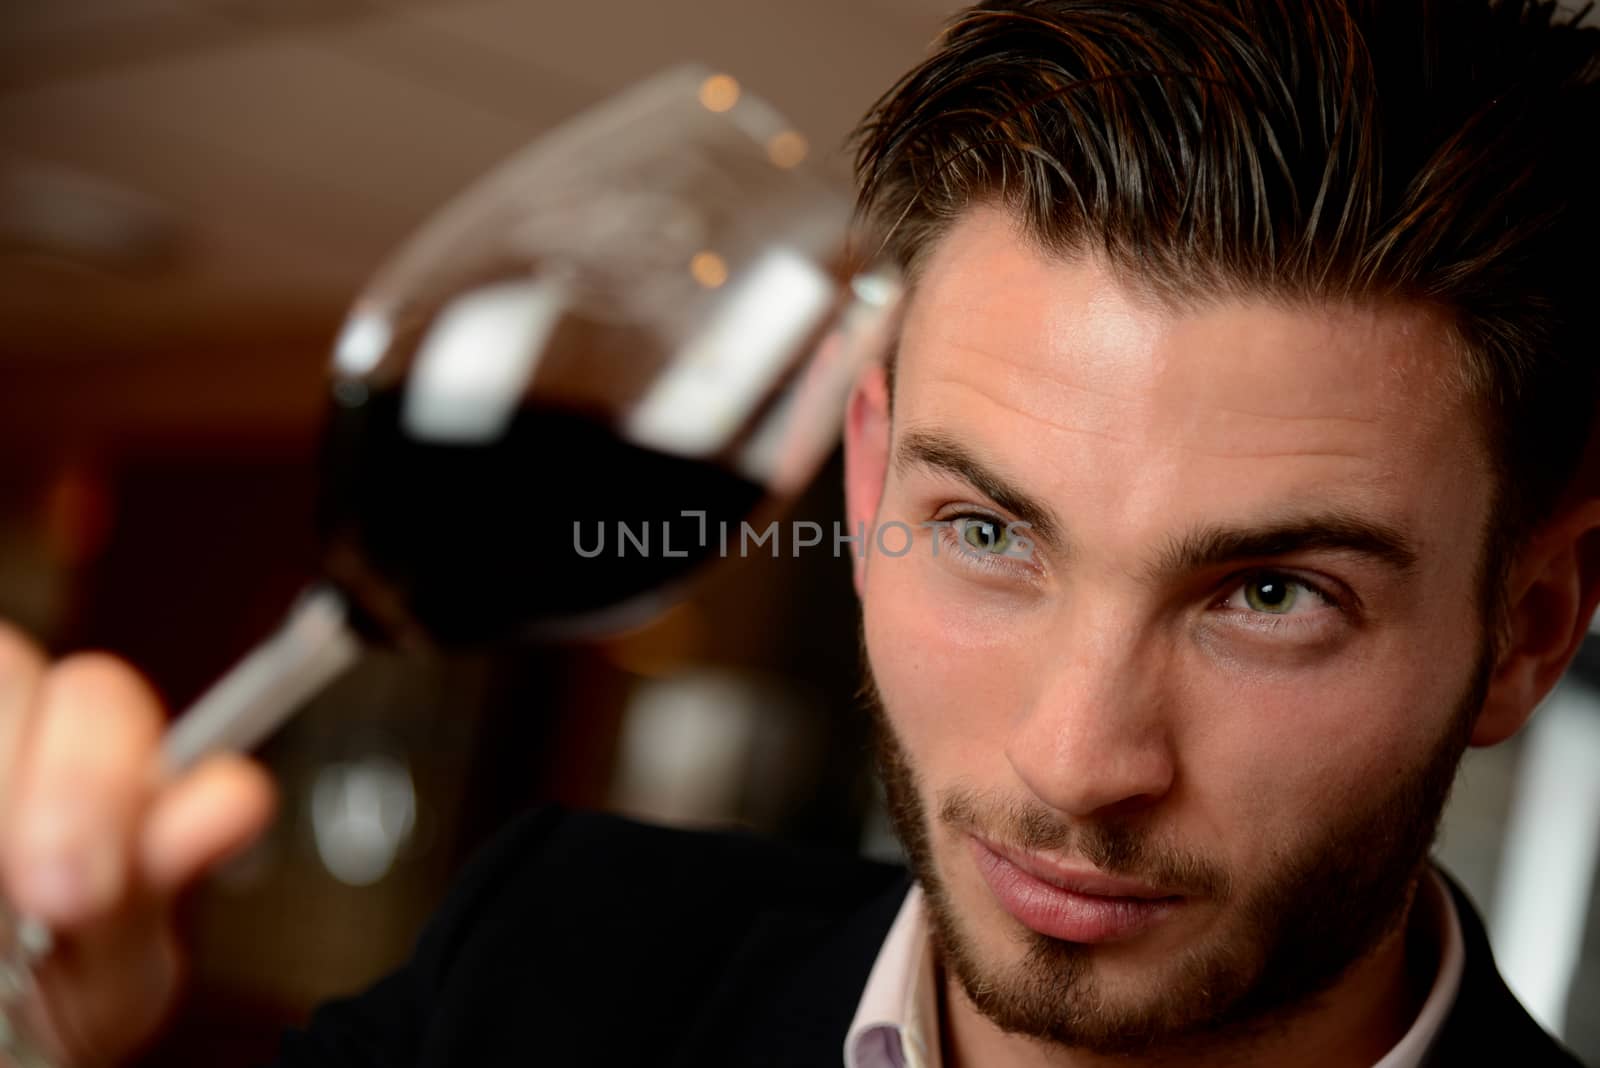 Young man with redwine glasses at celebration or party